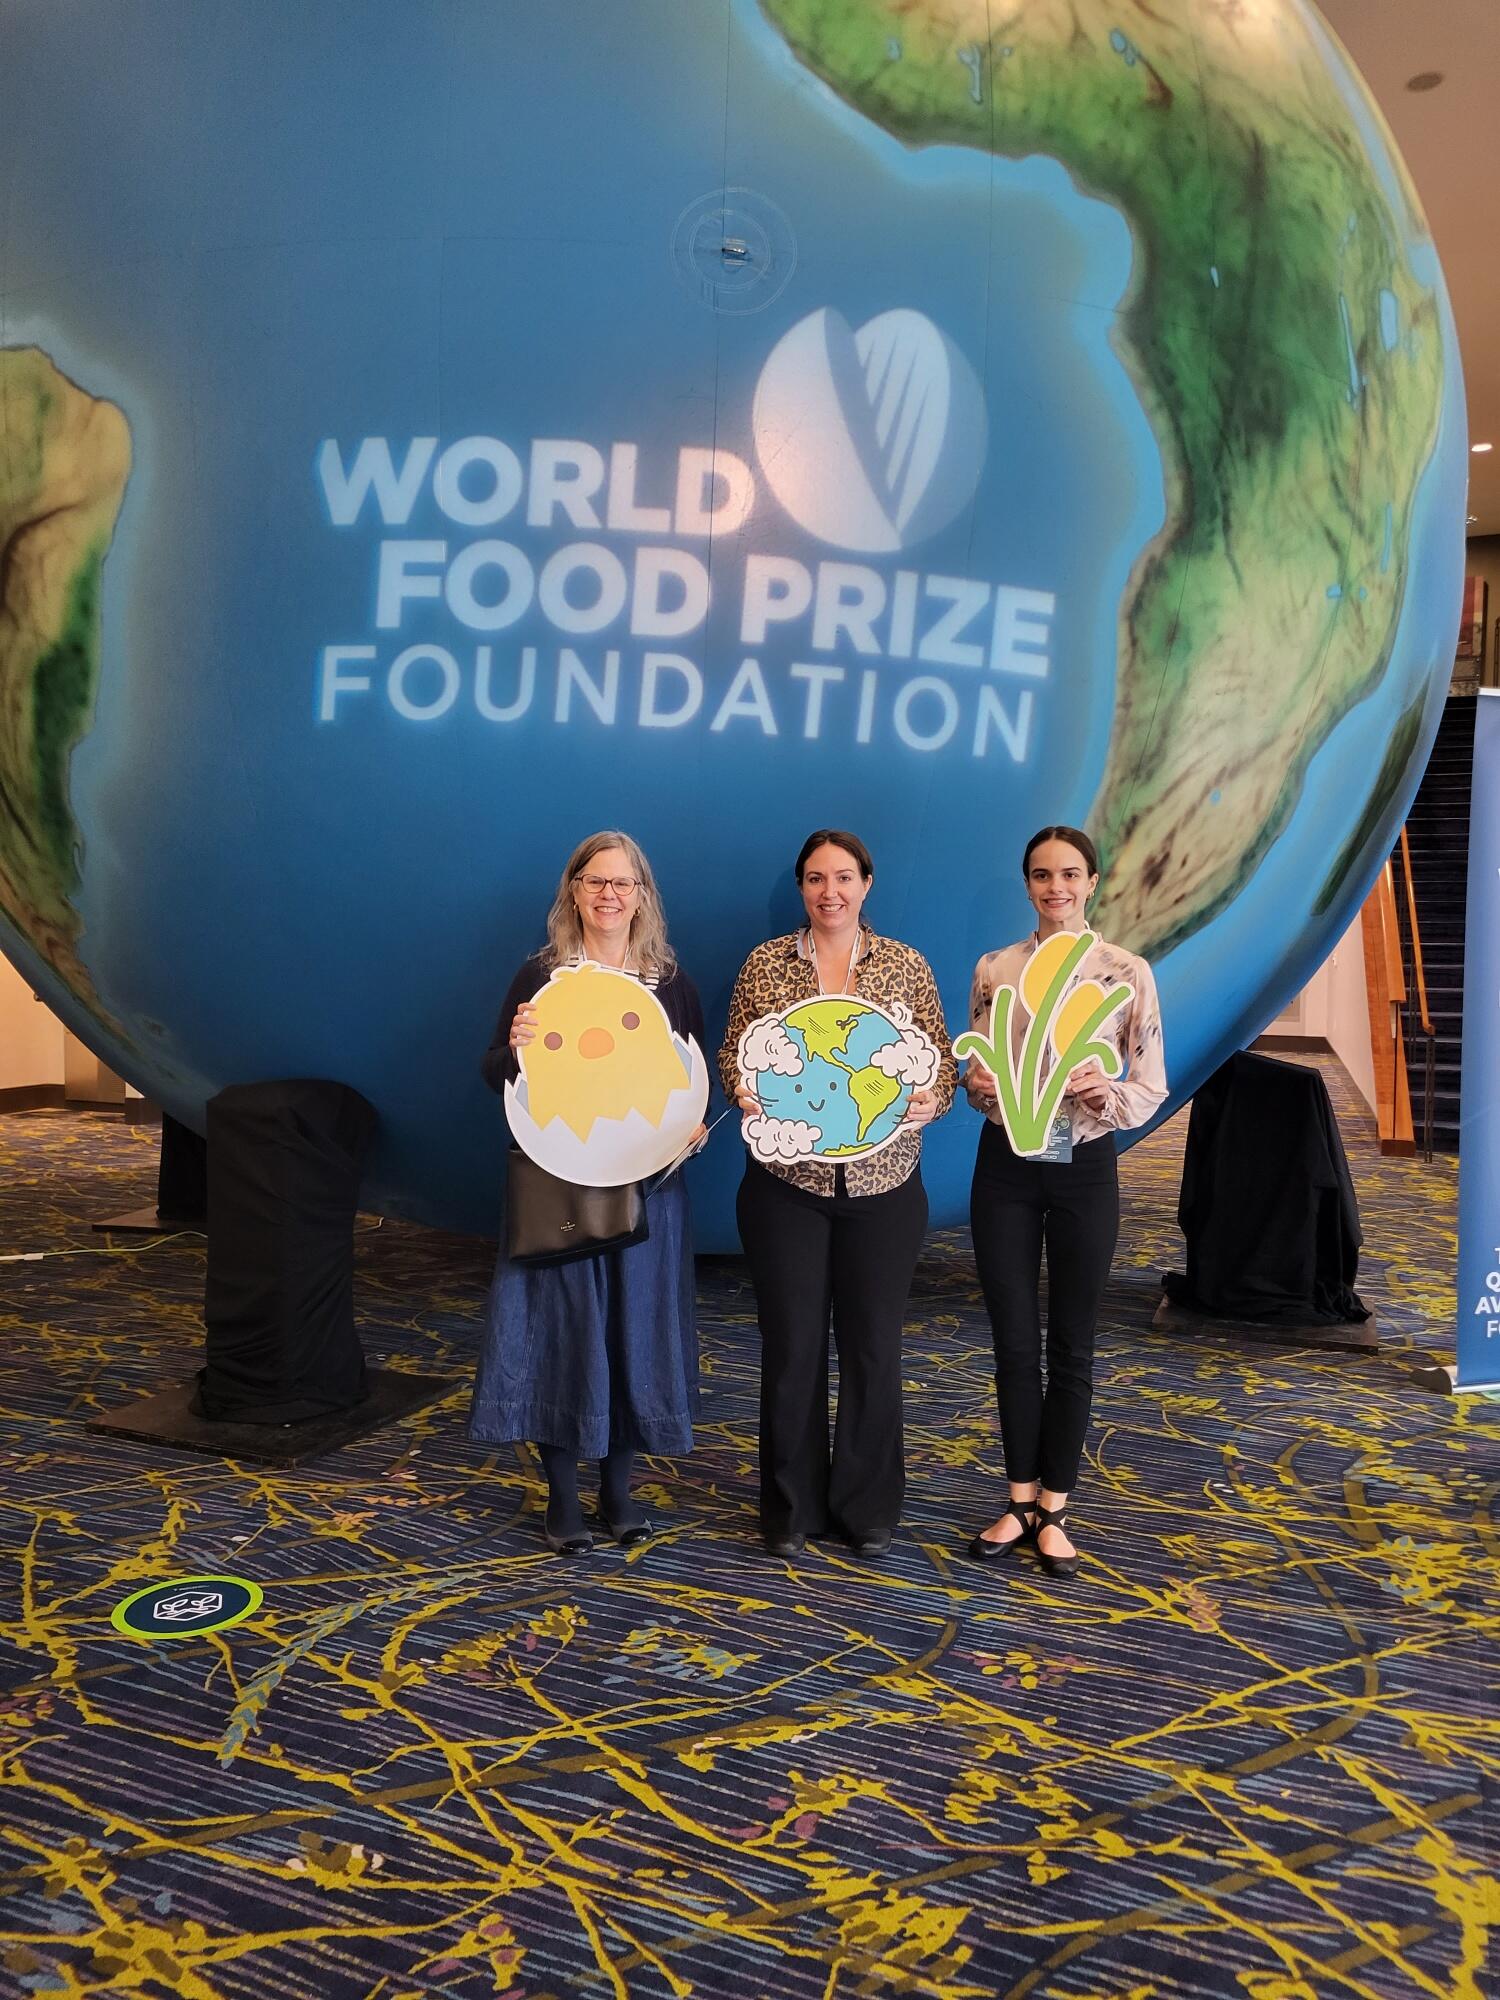 Mary Arends-Kuenning, Lauren Karplus, and Brighid Zelko at the World Food Prize.